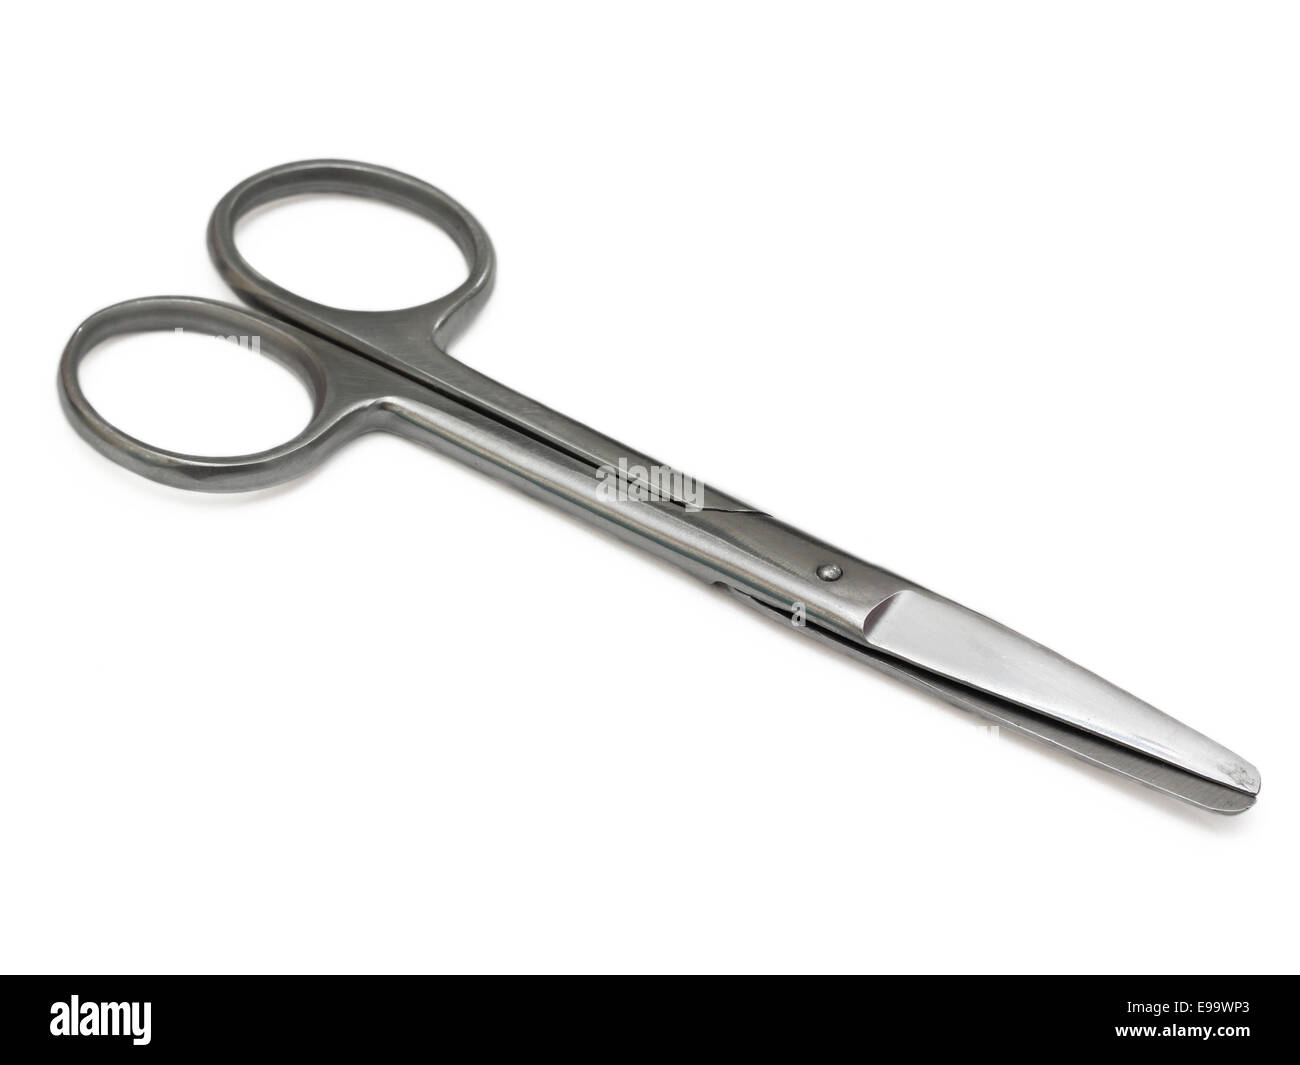 Metal medical shears on a white background Stock Photo - Alamy